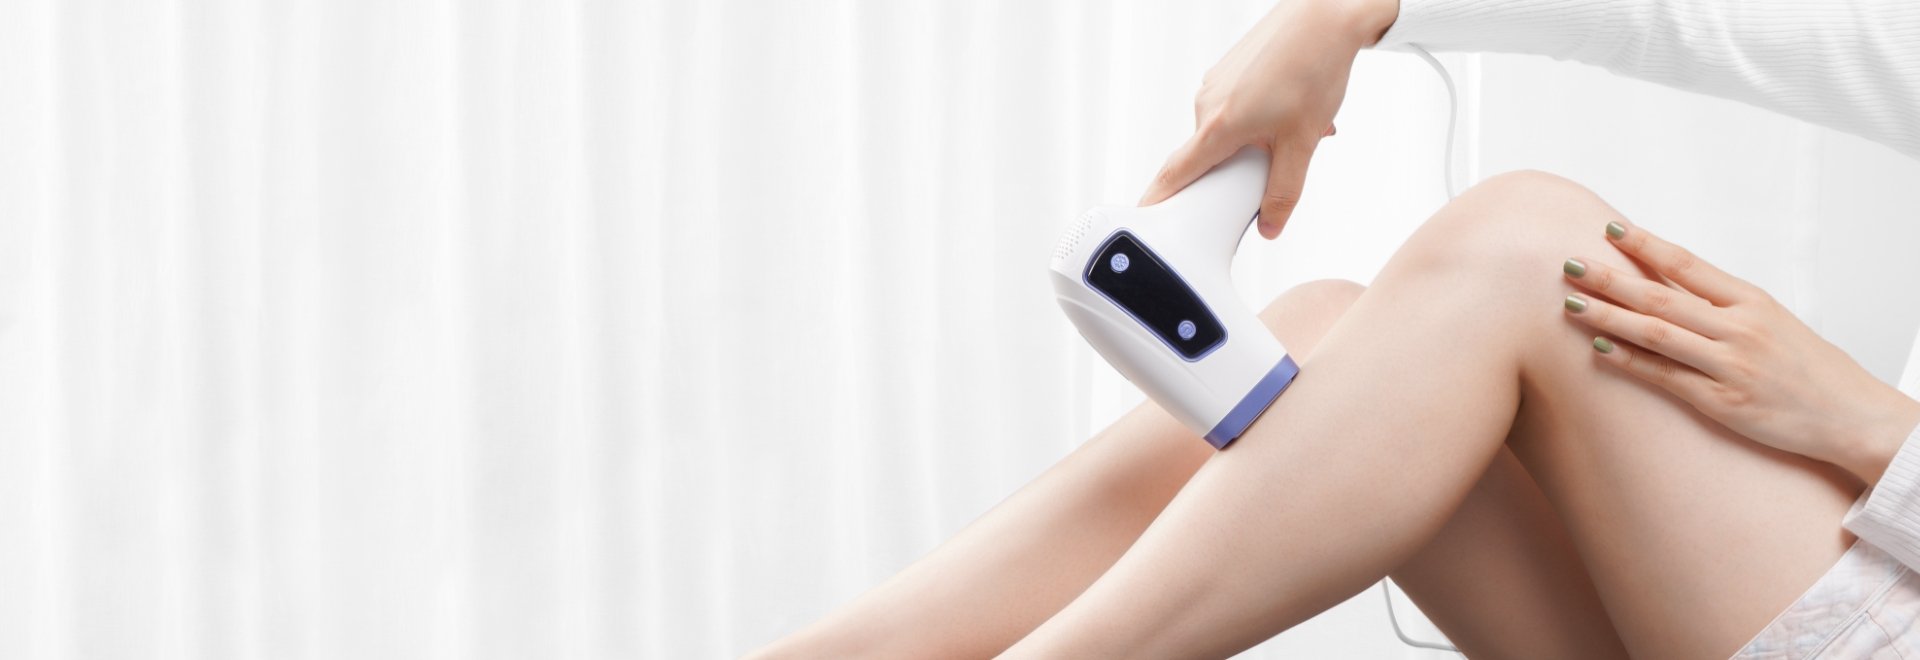 How To Use bonoch IPL Hair Removal Device At Home